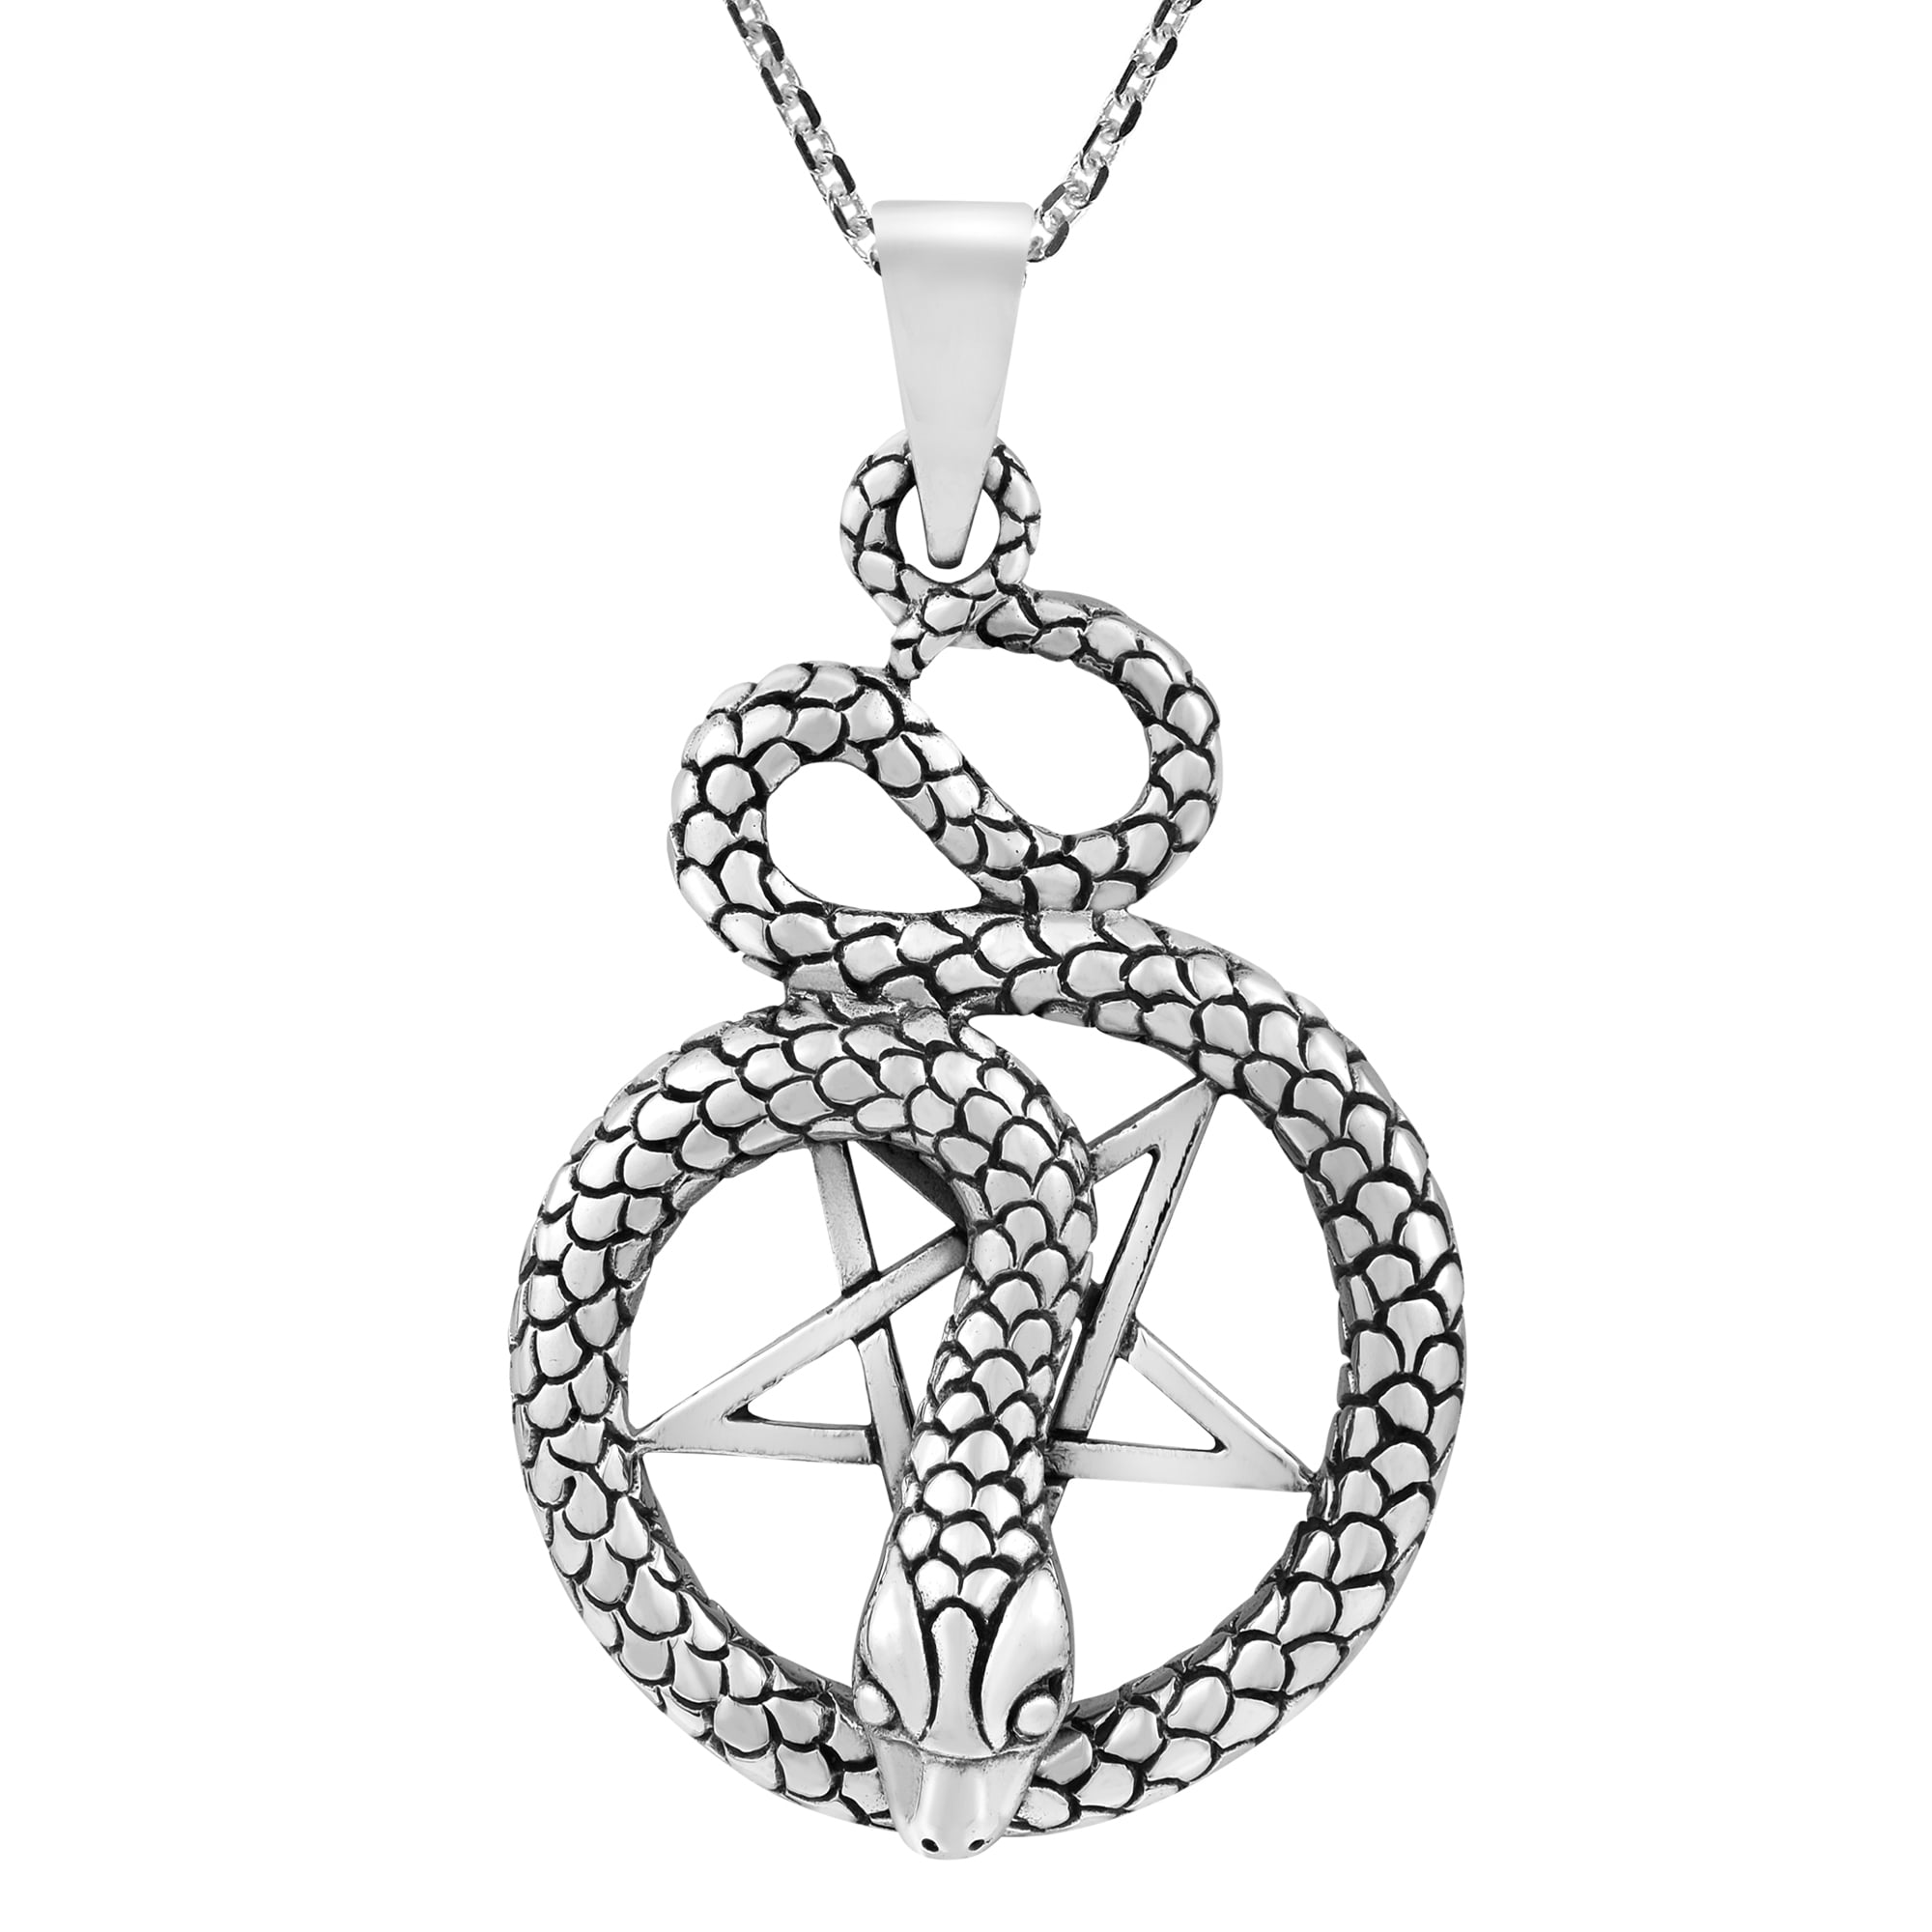 Unique Cool Solid Sterling Silver Coiled Snake Serpent Small Pendant Men Unisex 